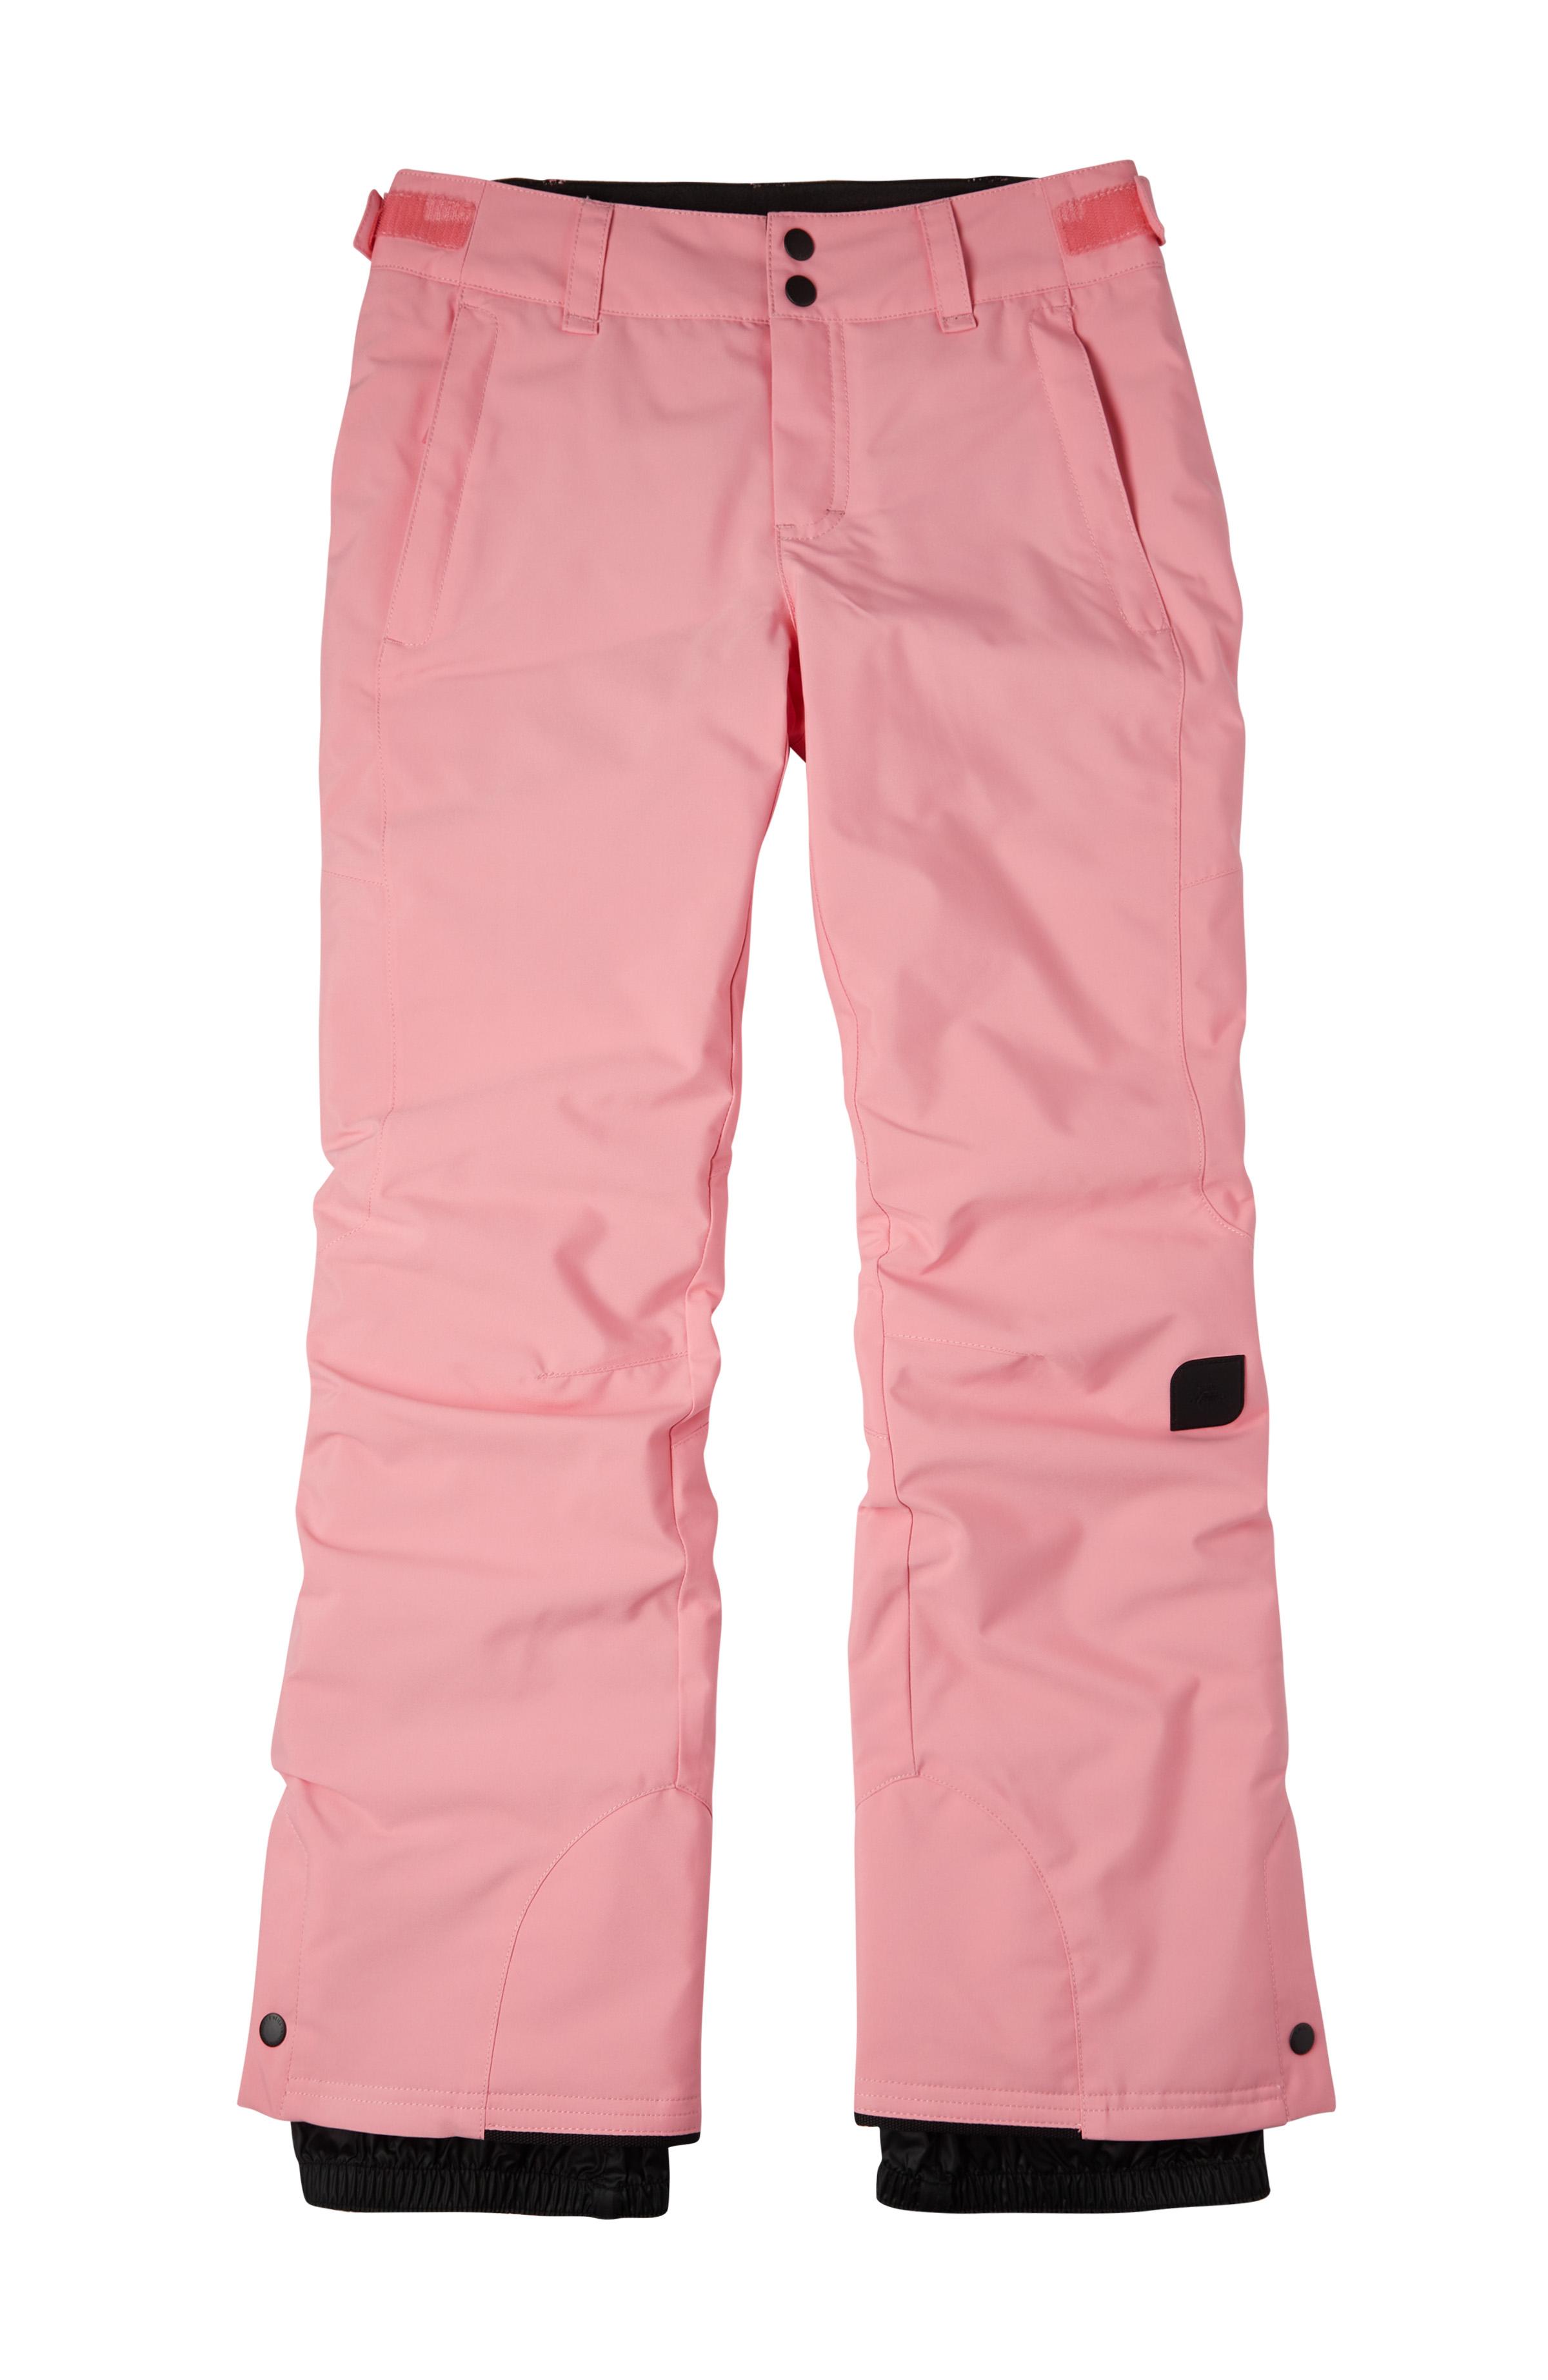 Image of O'NEILL Charm Snowboardhose Mädchen